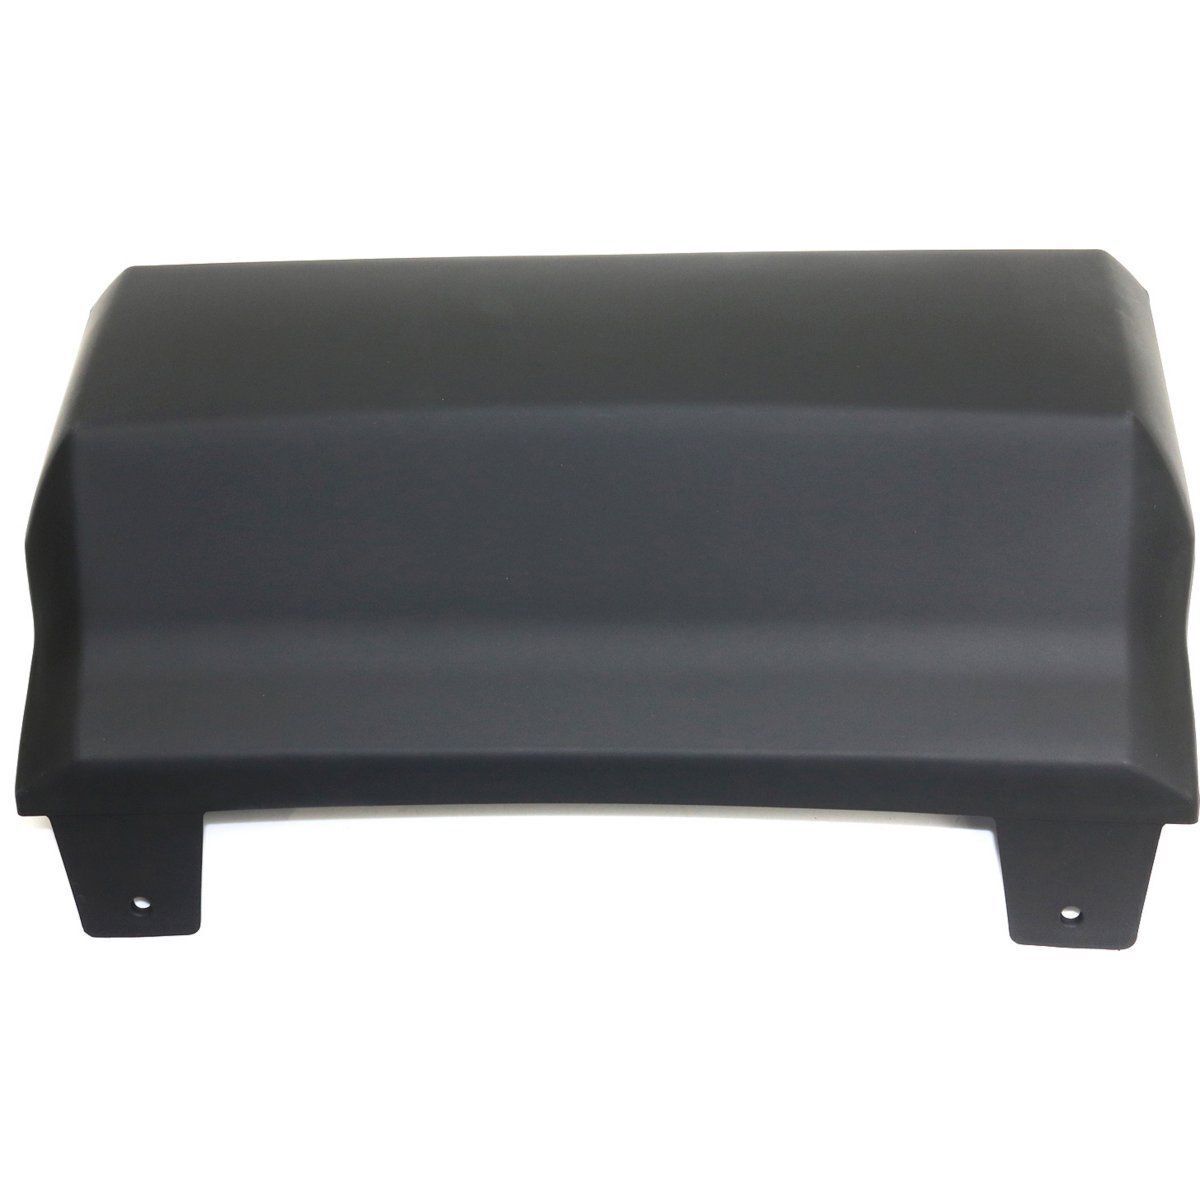 Hitch Cover Rear For Chevy 23142973 Chevrolet Tahoe Suburban 3500 HD 2016-2019